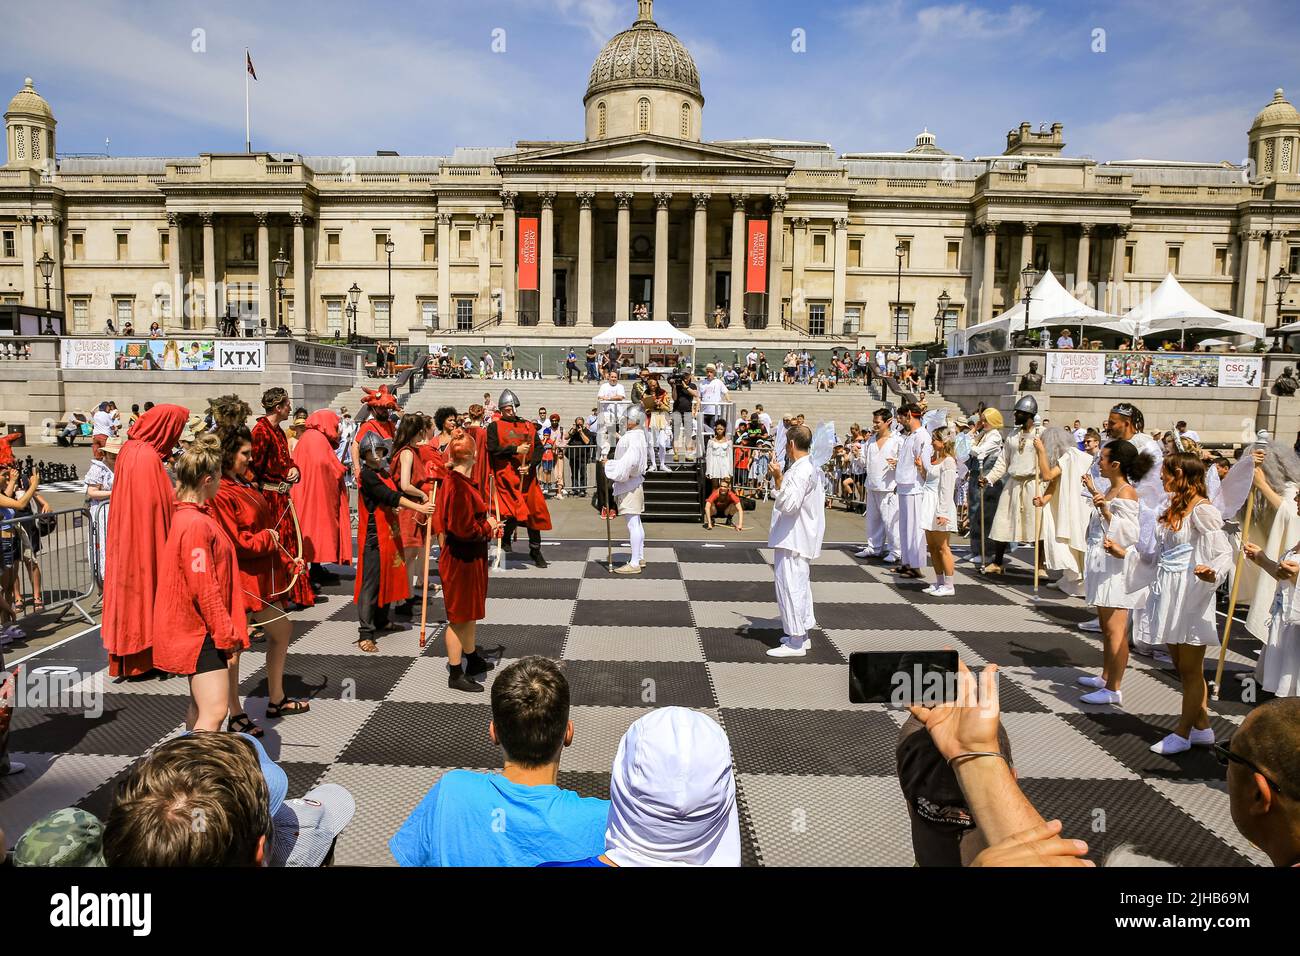 London, UK. 17th July, 2022. A living chess set - with 32 professional actors taking on the role of the chess pieces, brings fun to the audience, who watch the re-enactment of a Championship game. Players of all ages and capabilities play chess on the square. The UK's largest one-day chess event takes place on London's Trafalgar Square and is aimed at anyone who loves or wants to learn chess, and is free of charge. Credit: Imageplotter/Alamy Live News Stock Photo